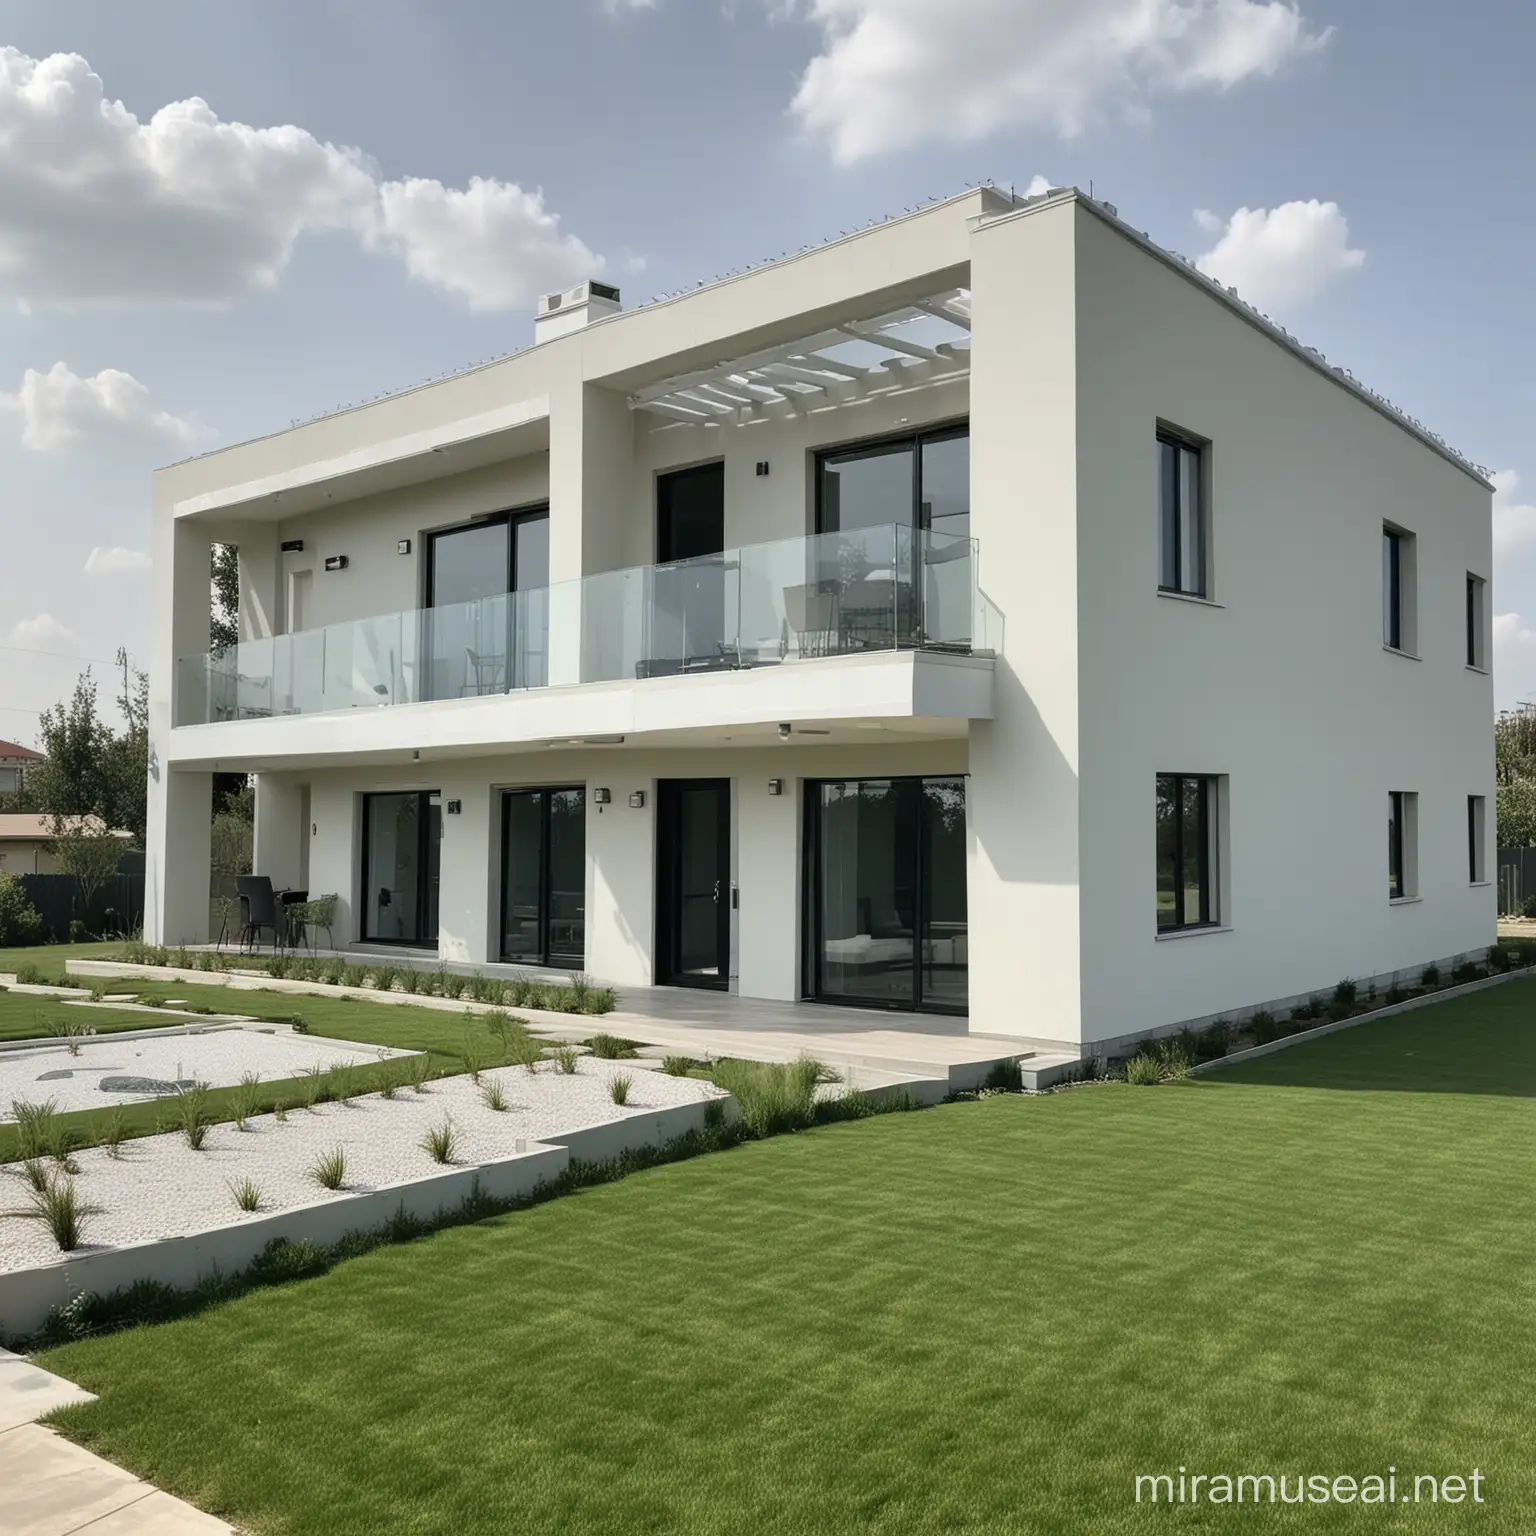 Modern Villa with Wired EPS Panels and Green Lawn